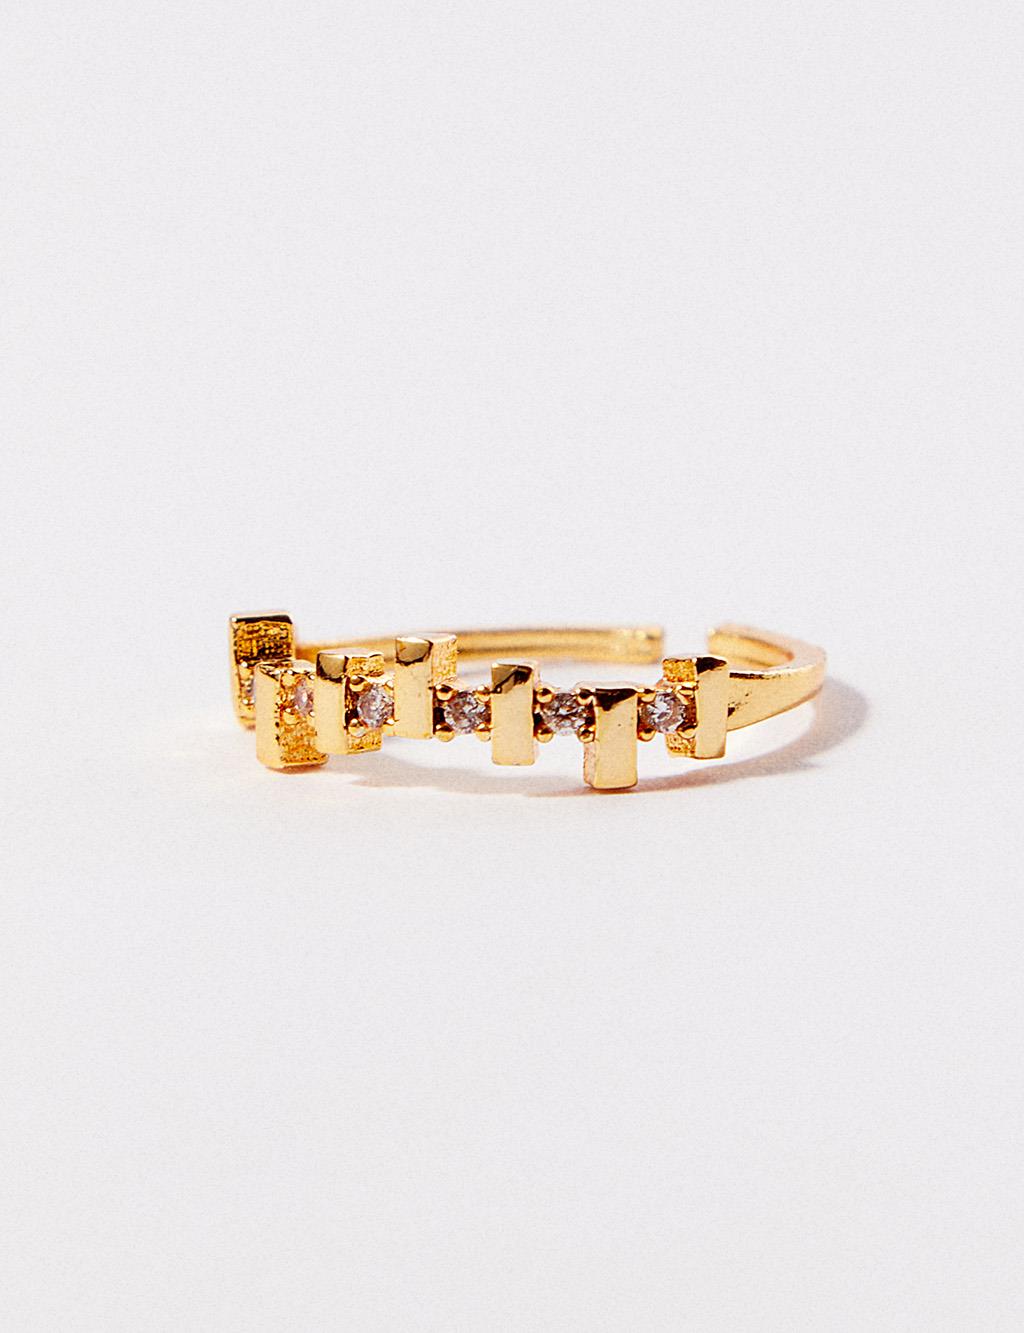 Metal Part and Stone Ring Gold Color